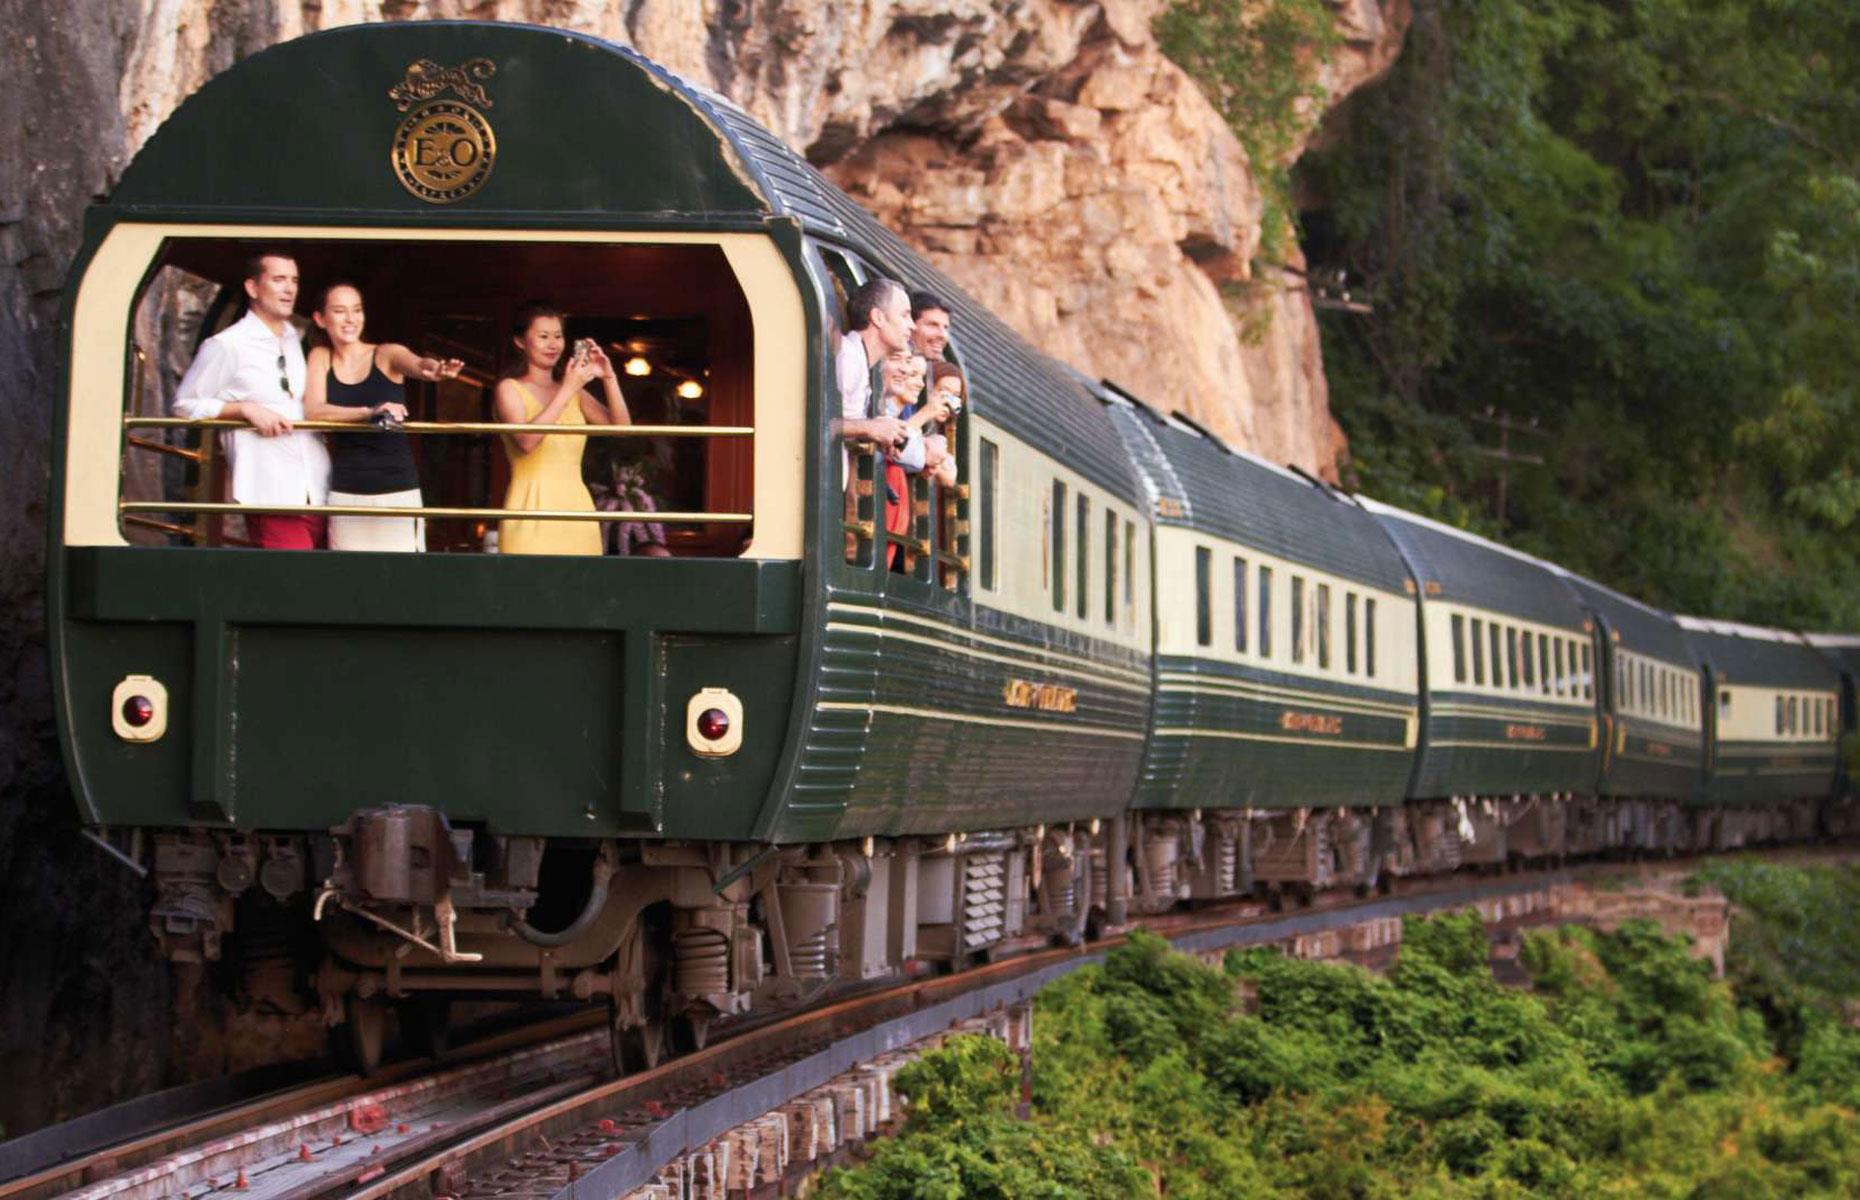 <p>Owned by LVMH, Belmond has an enviable portfolio that includes some of the world's most renowned hotels and restaurants, as well as four of the most prestigious rail experiences: the fabled <em>Venice Simplon-Orient-Express</em>, <em>Royal Scotsman</em>, <em>Andean Explorer</em>, and <em>Eastern & Oriental Express</em>.</p>  <p>The latter, launched in 1972, travels between Singapore, Malaysia and Thailand. It recently underwent a stunning refurbishment and will return to service in 2024 following a four-year hiatus.</p>